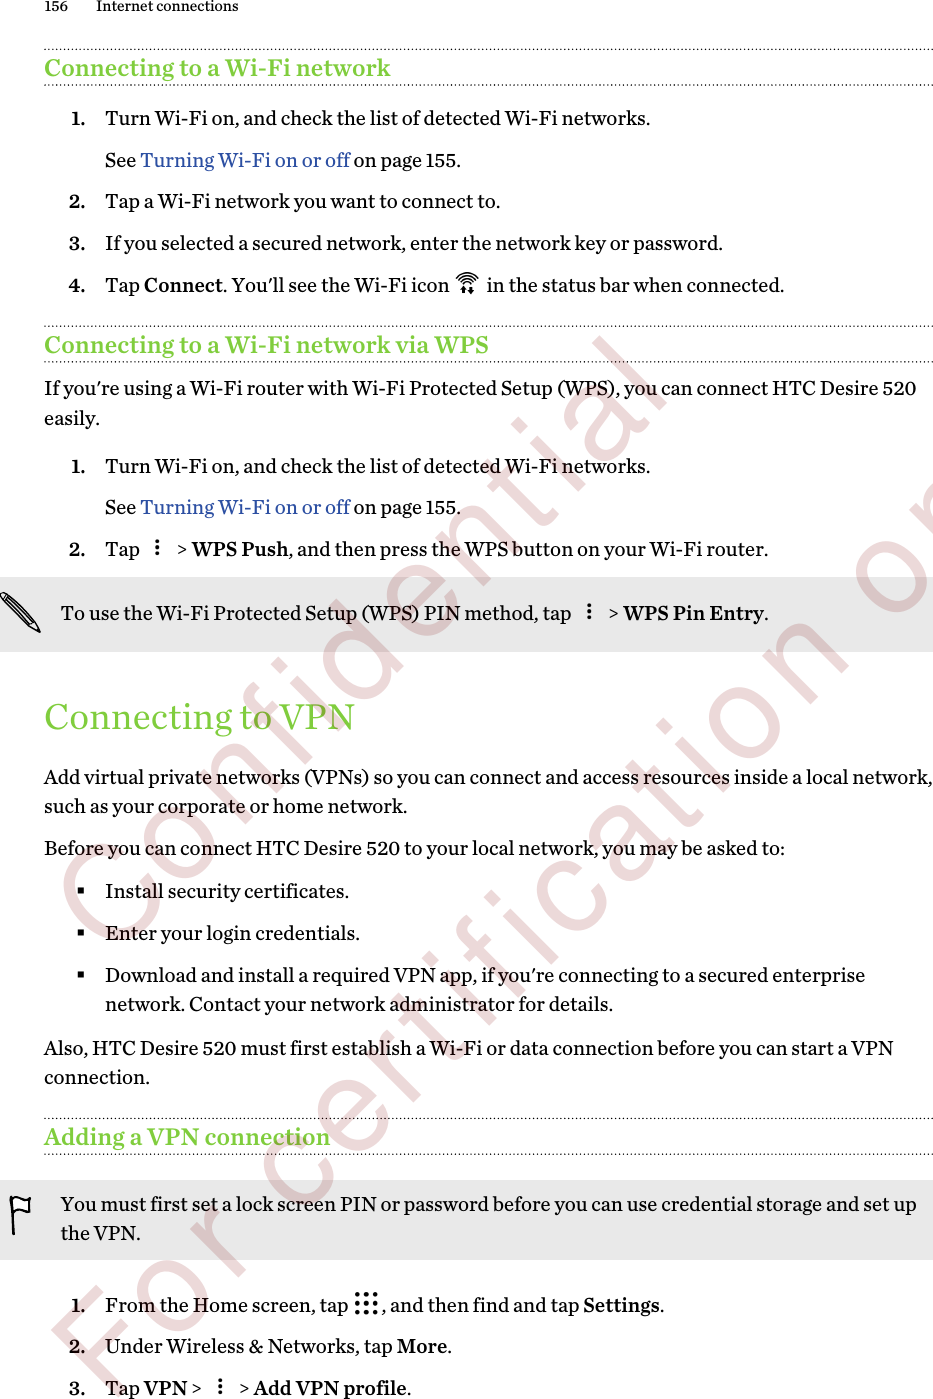 Connecting to a Wi-Fi network1. Turn Wi-Fi on, and check the list of detected Wi-Fi networks. See Turning Wi-Fi on or off on page 155.2. Tap a Wi-Fi network you want to connect to.3. If you selected a secured network, enter the network key or password.4. Tap Connect. You&apos;ll see the Wi-Fi icon   in the status bar when connected.Connecting to a Wi-Fi network via WPSIf you&apos;re using a Wi-Fi router with Wi-Fi Protected Setup (WPS), you can connect HTC Desire 520easily.1. Turn Wi-Fi on, and check the list of detected Wi-Fi networks. See Turning Wi-Fi on or off on page 155.2. Tap   &gt; WPS Push, and then press the WPS button on your Wi-Fi router. To use the Wi-Fi Protected Setup (WPS) PIN method, tap   &gt; WPS Pin Entry.Connecting to VPNAdd virtual private networks (VPNs) so you can connect and access resources inside a local network,such as your corporate or home network.Before you can connect HTC Desire 520 to your local network, you may be asked to:§Install security certificates.§Enter your login credentials.§Download and install a required VPN app, if you&apos;re connecting to a secured enterprisenetwork. Contact your network administrator for details.Also, HTC Desire 520 must first establish a Wi-Fi or data connection before you can start a VPNconnection.Adding a VPN connectionYou must first set a lock screen PIN or password before you can use credential storage and set upthe VPN.1. From the Home screen, tap  , and then find and tap Settings.2. Under Wireless &amp; Networks, tap More.3. Tap VPN &gt;   &gt; Add VPN profile.156 Internet connections        Confidential  For certification only